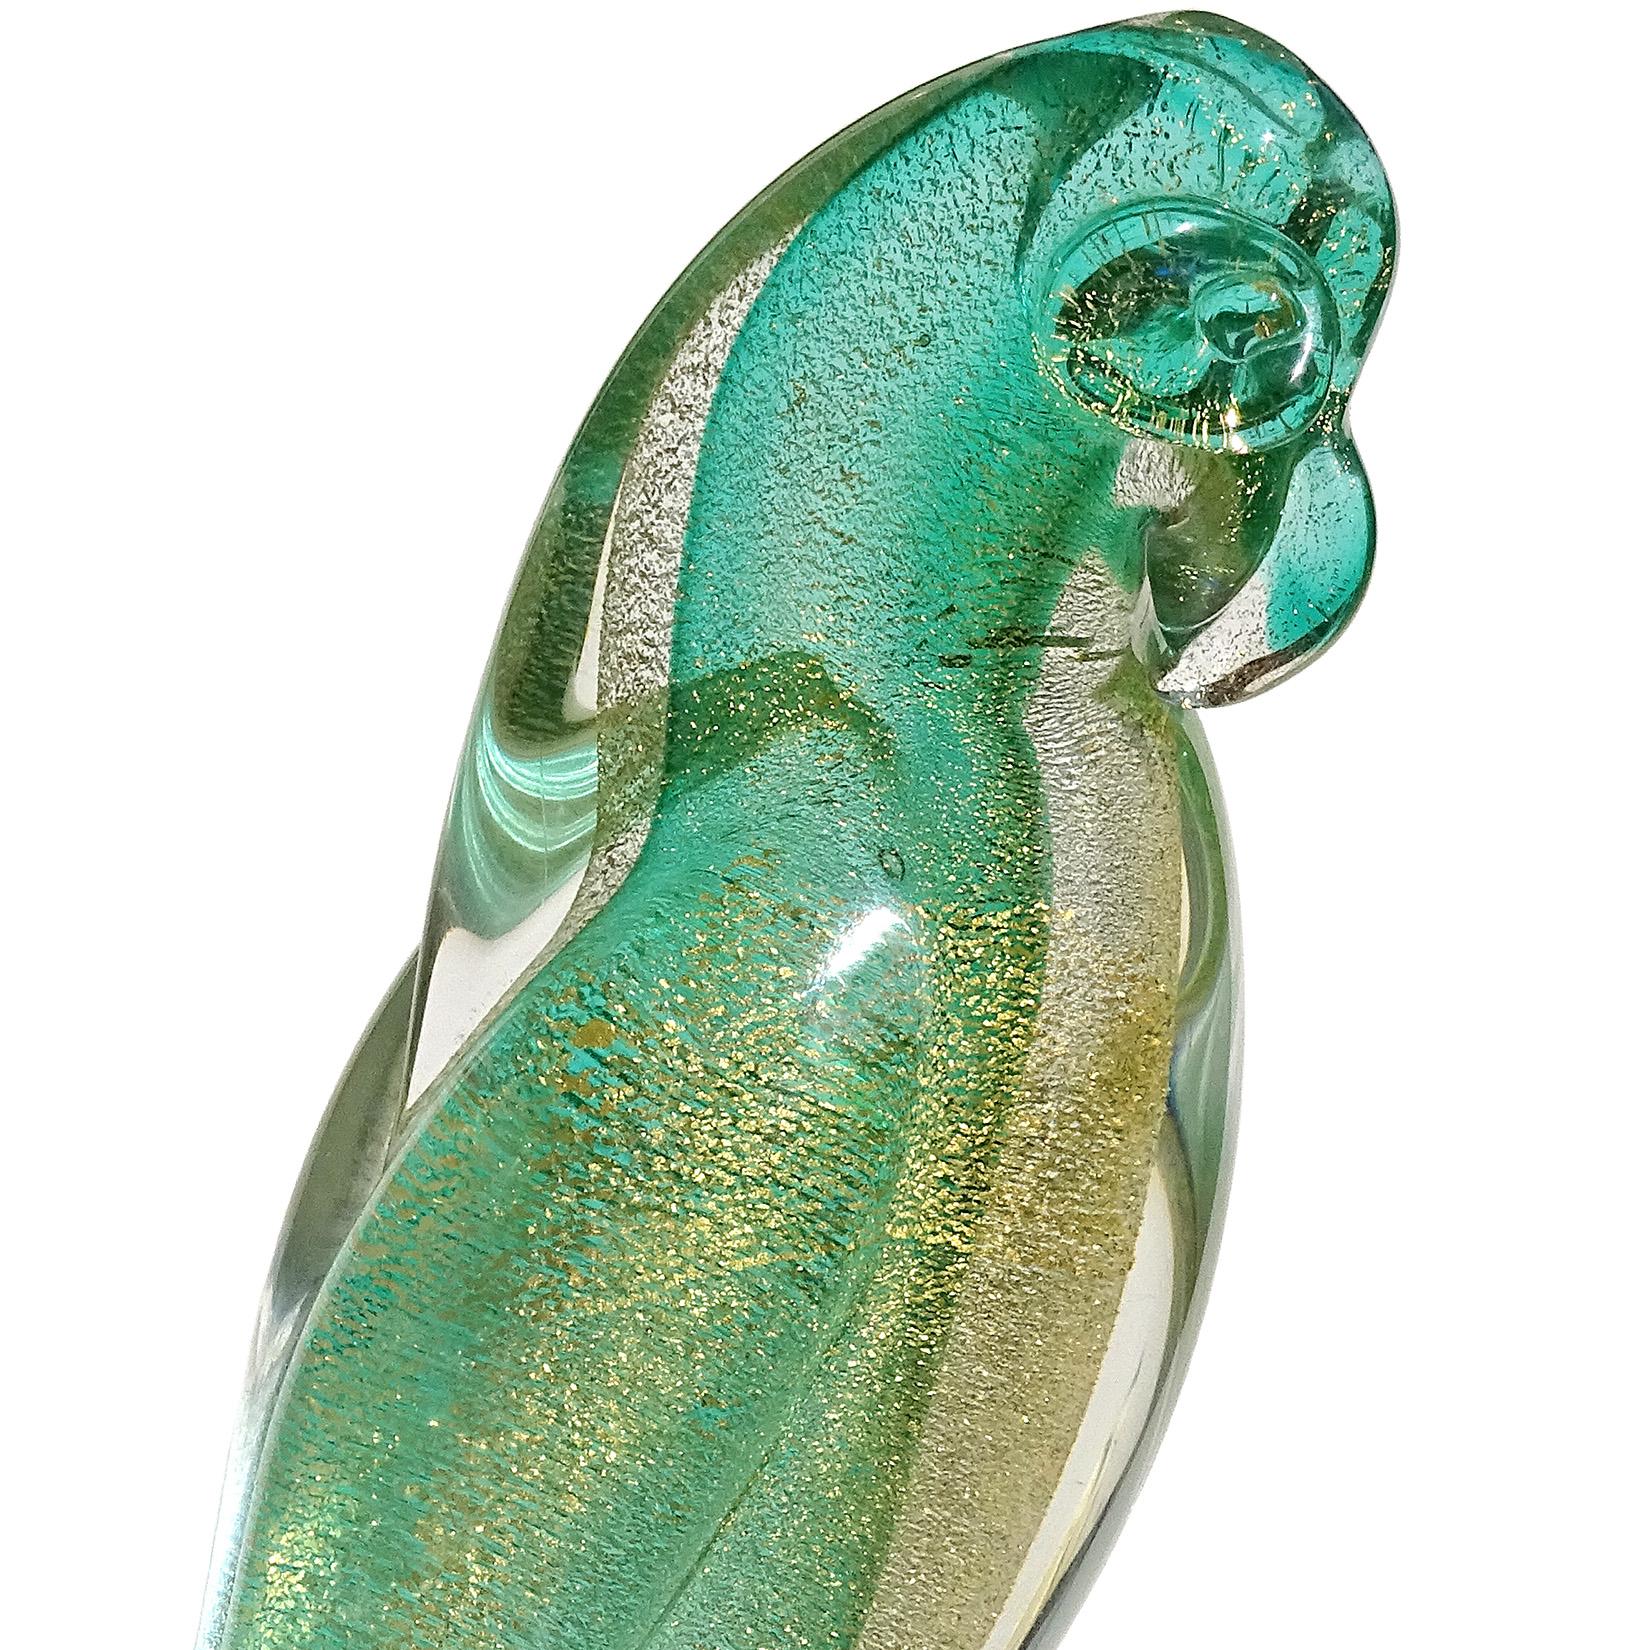 Beautiful vintage Murano hand blown, green and gold flecks Italian art glass parrot bird sculpture. Documented to designer Archimede Seguso. The bird stands on a clear pedestal, with organic shaped at the bottom of the base. Midcentury era. Measures